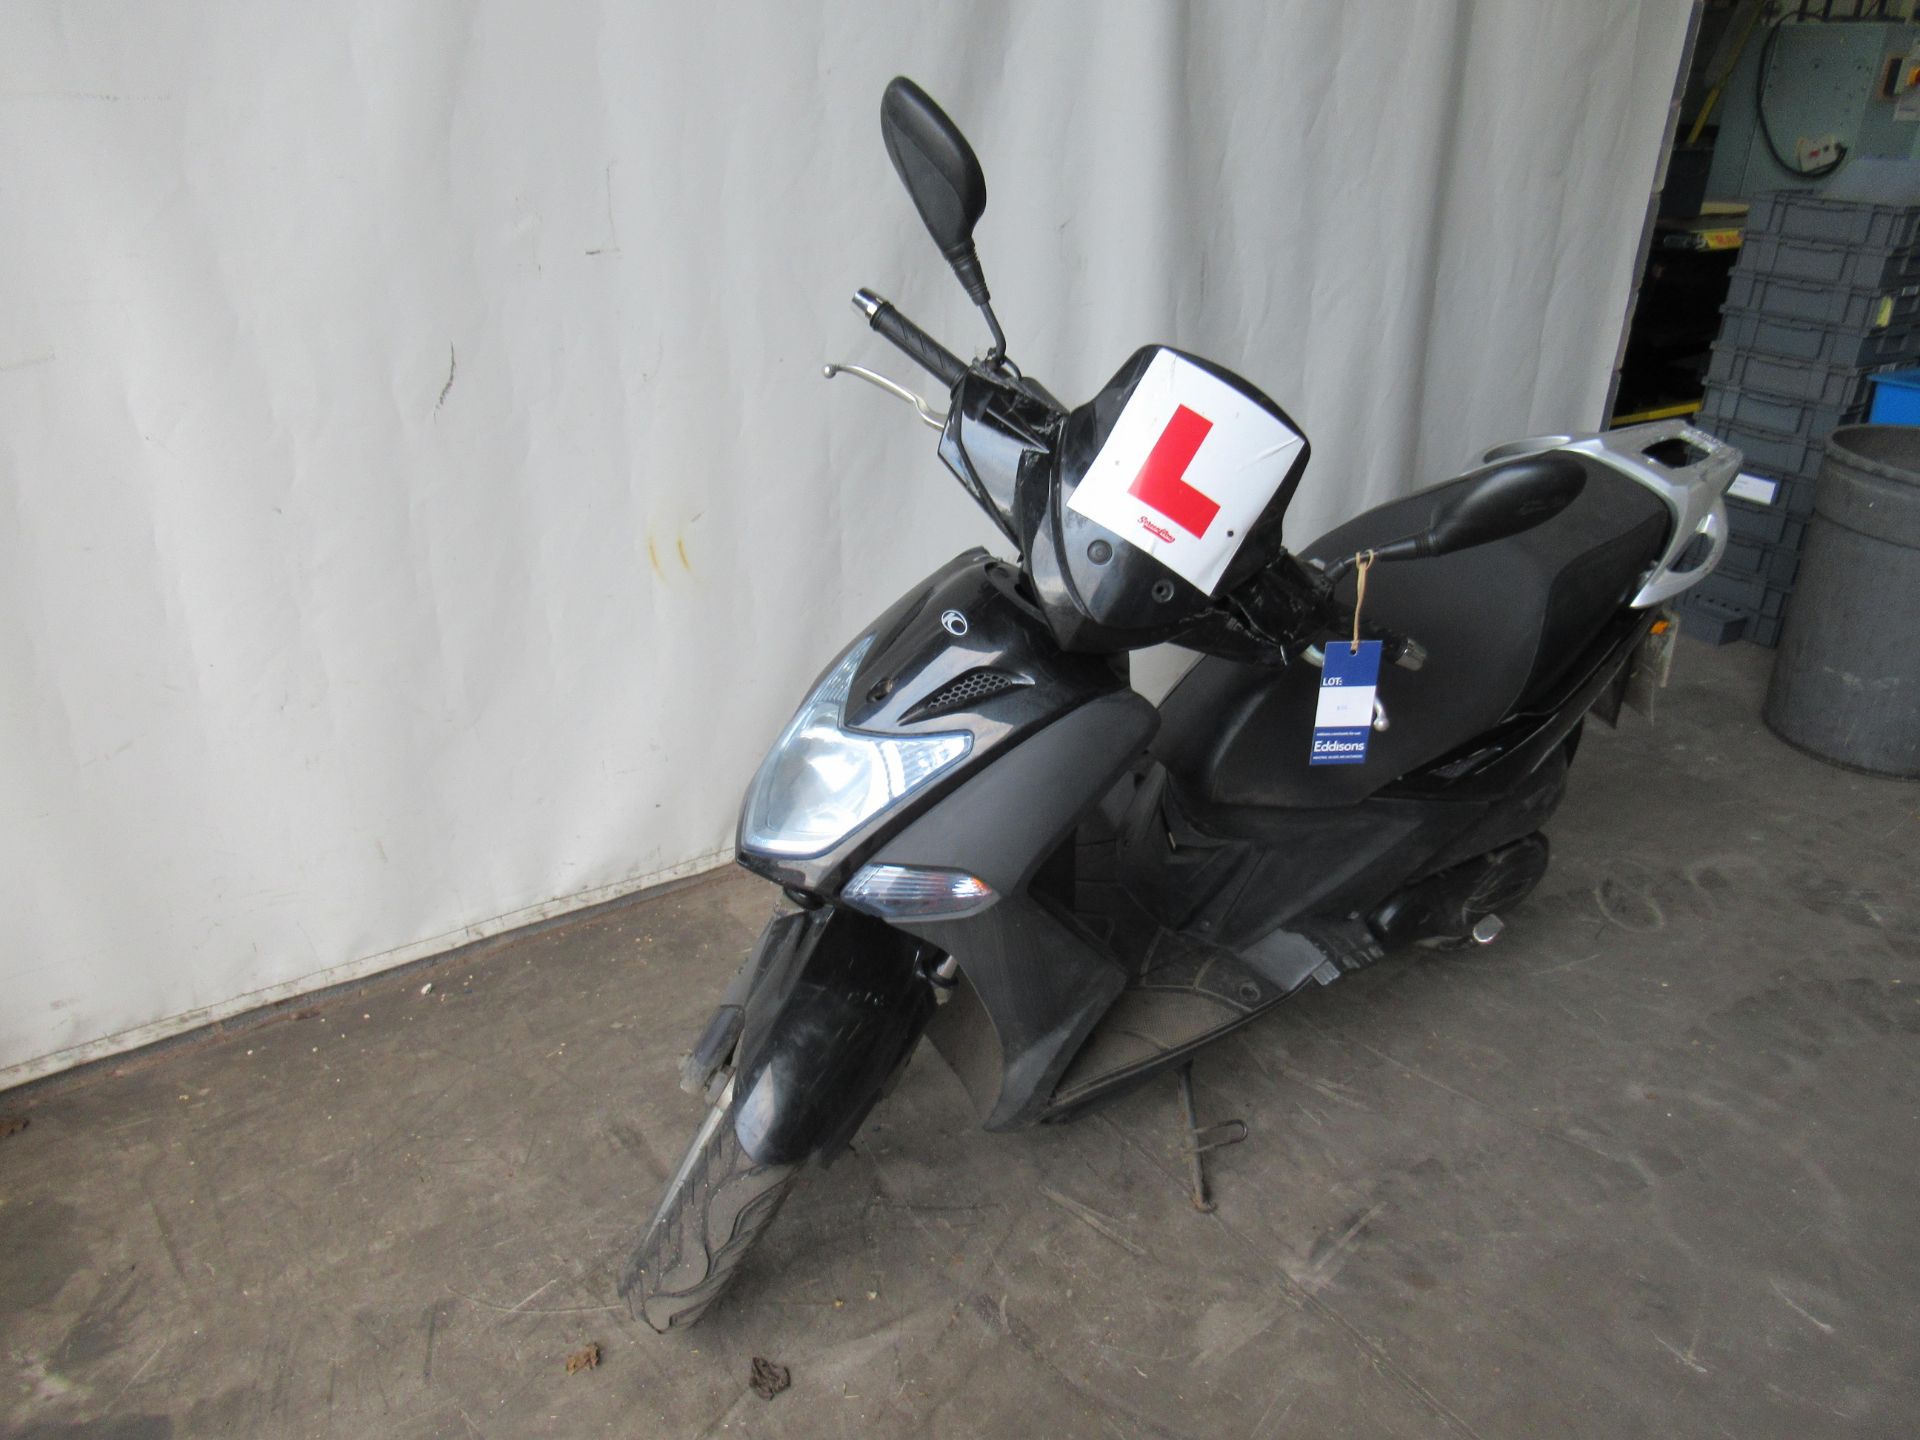 Kymco Agility 125 moped Registration FY69 BWF - Image 2 of 15